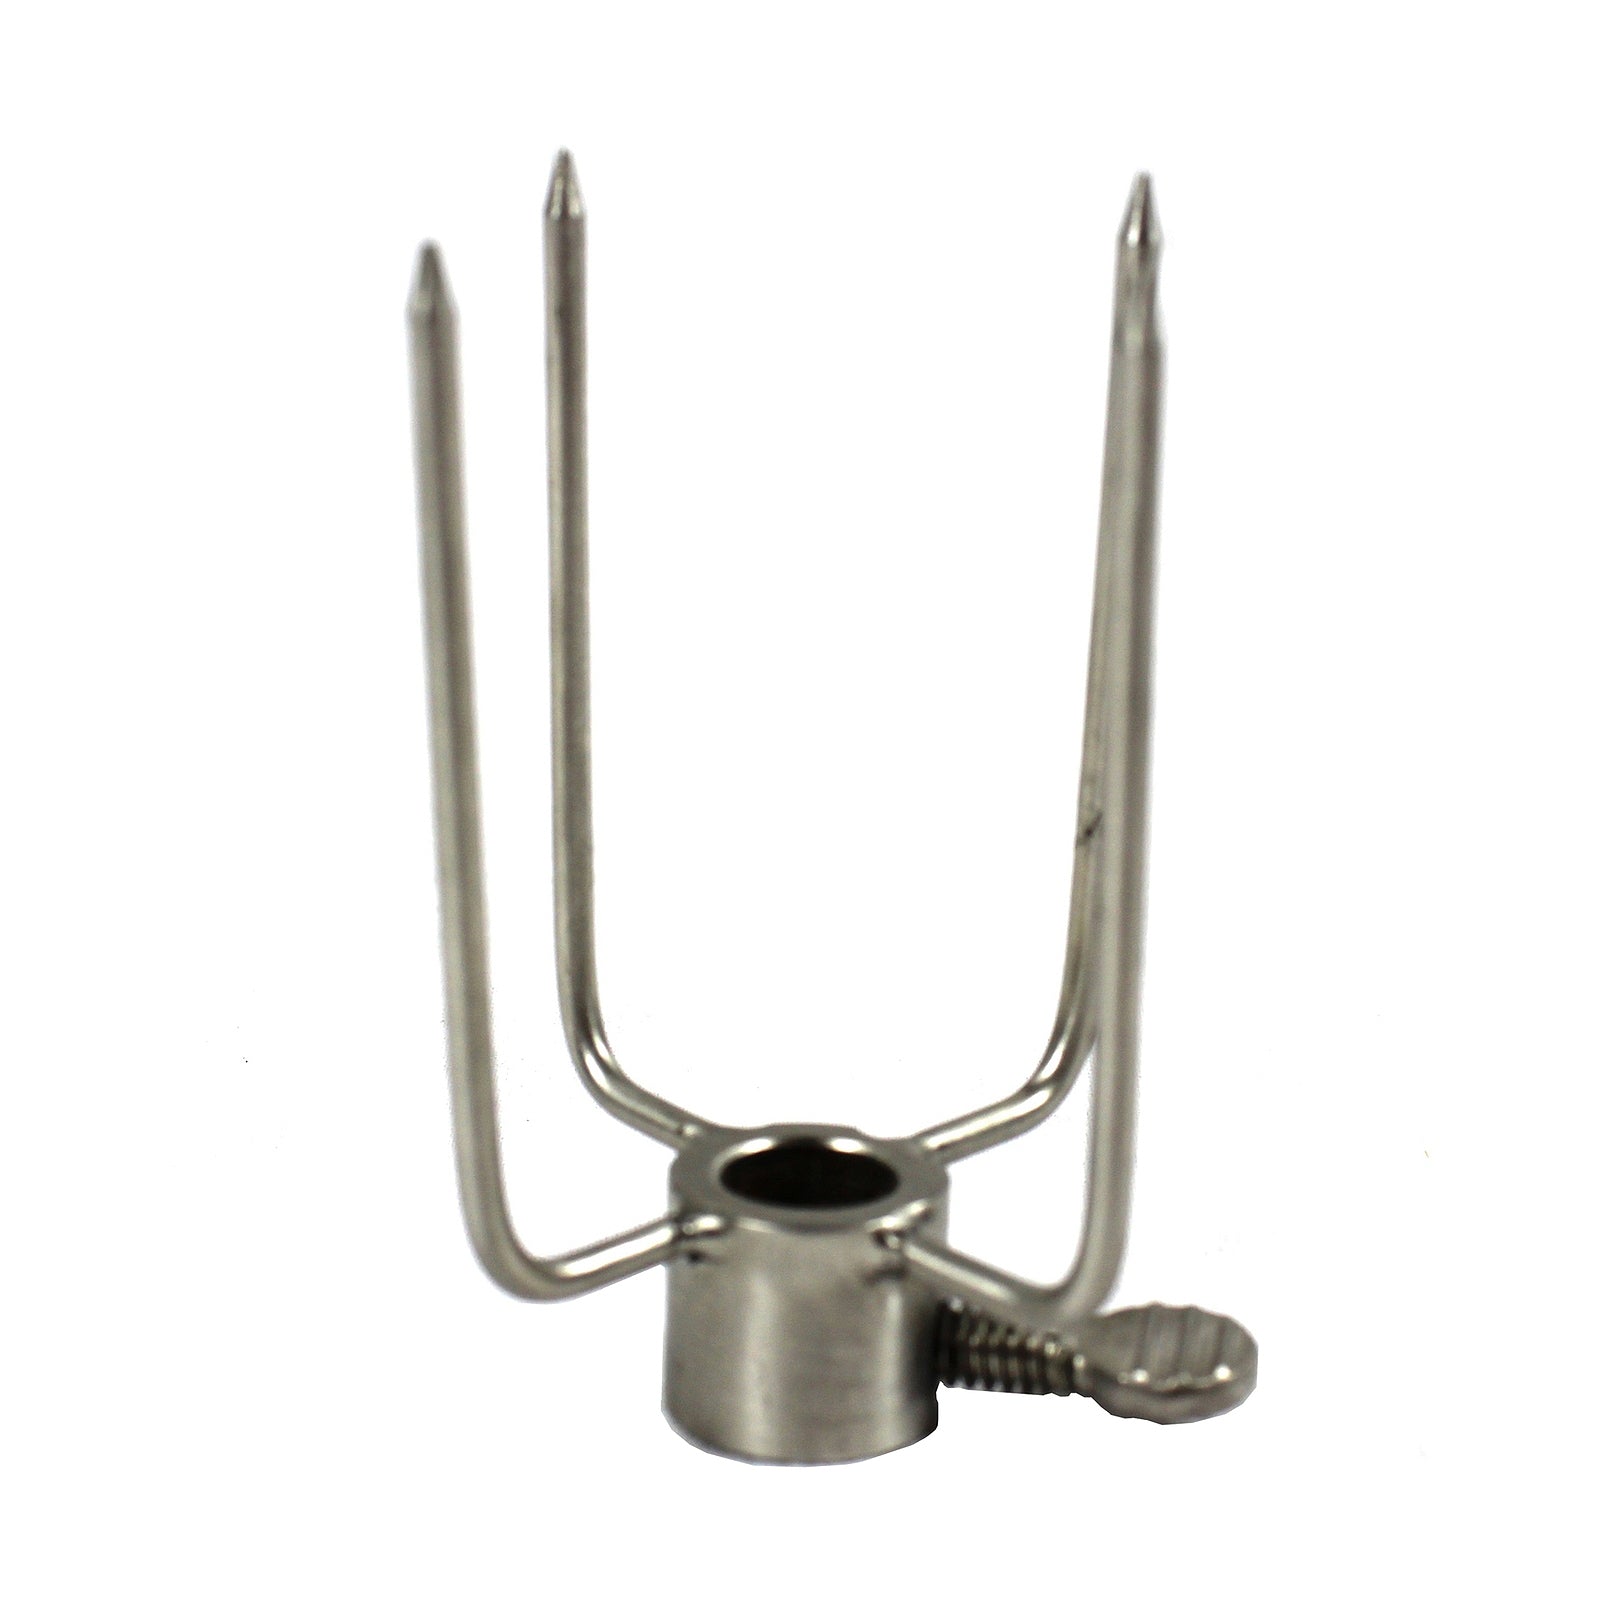 Mini Stainless Steel Round Small 4 Prong Fork Set (Pack of 2) From The BBQ Store - (Round 8mm)  - SSDC-0080